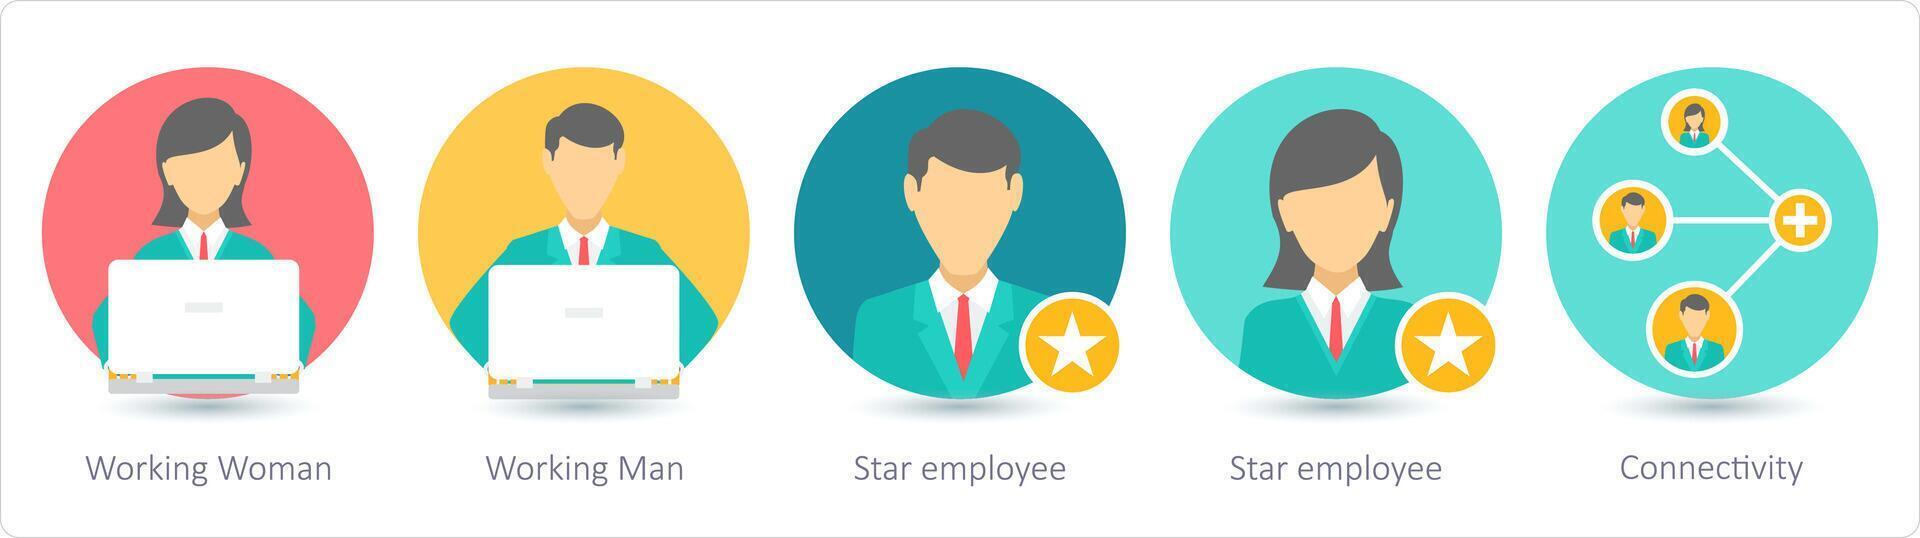 A set of 5 business icons as working woman, working man, star employee vector